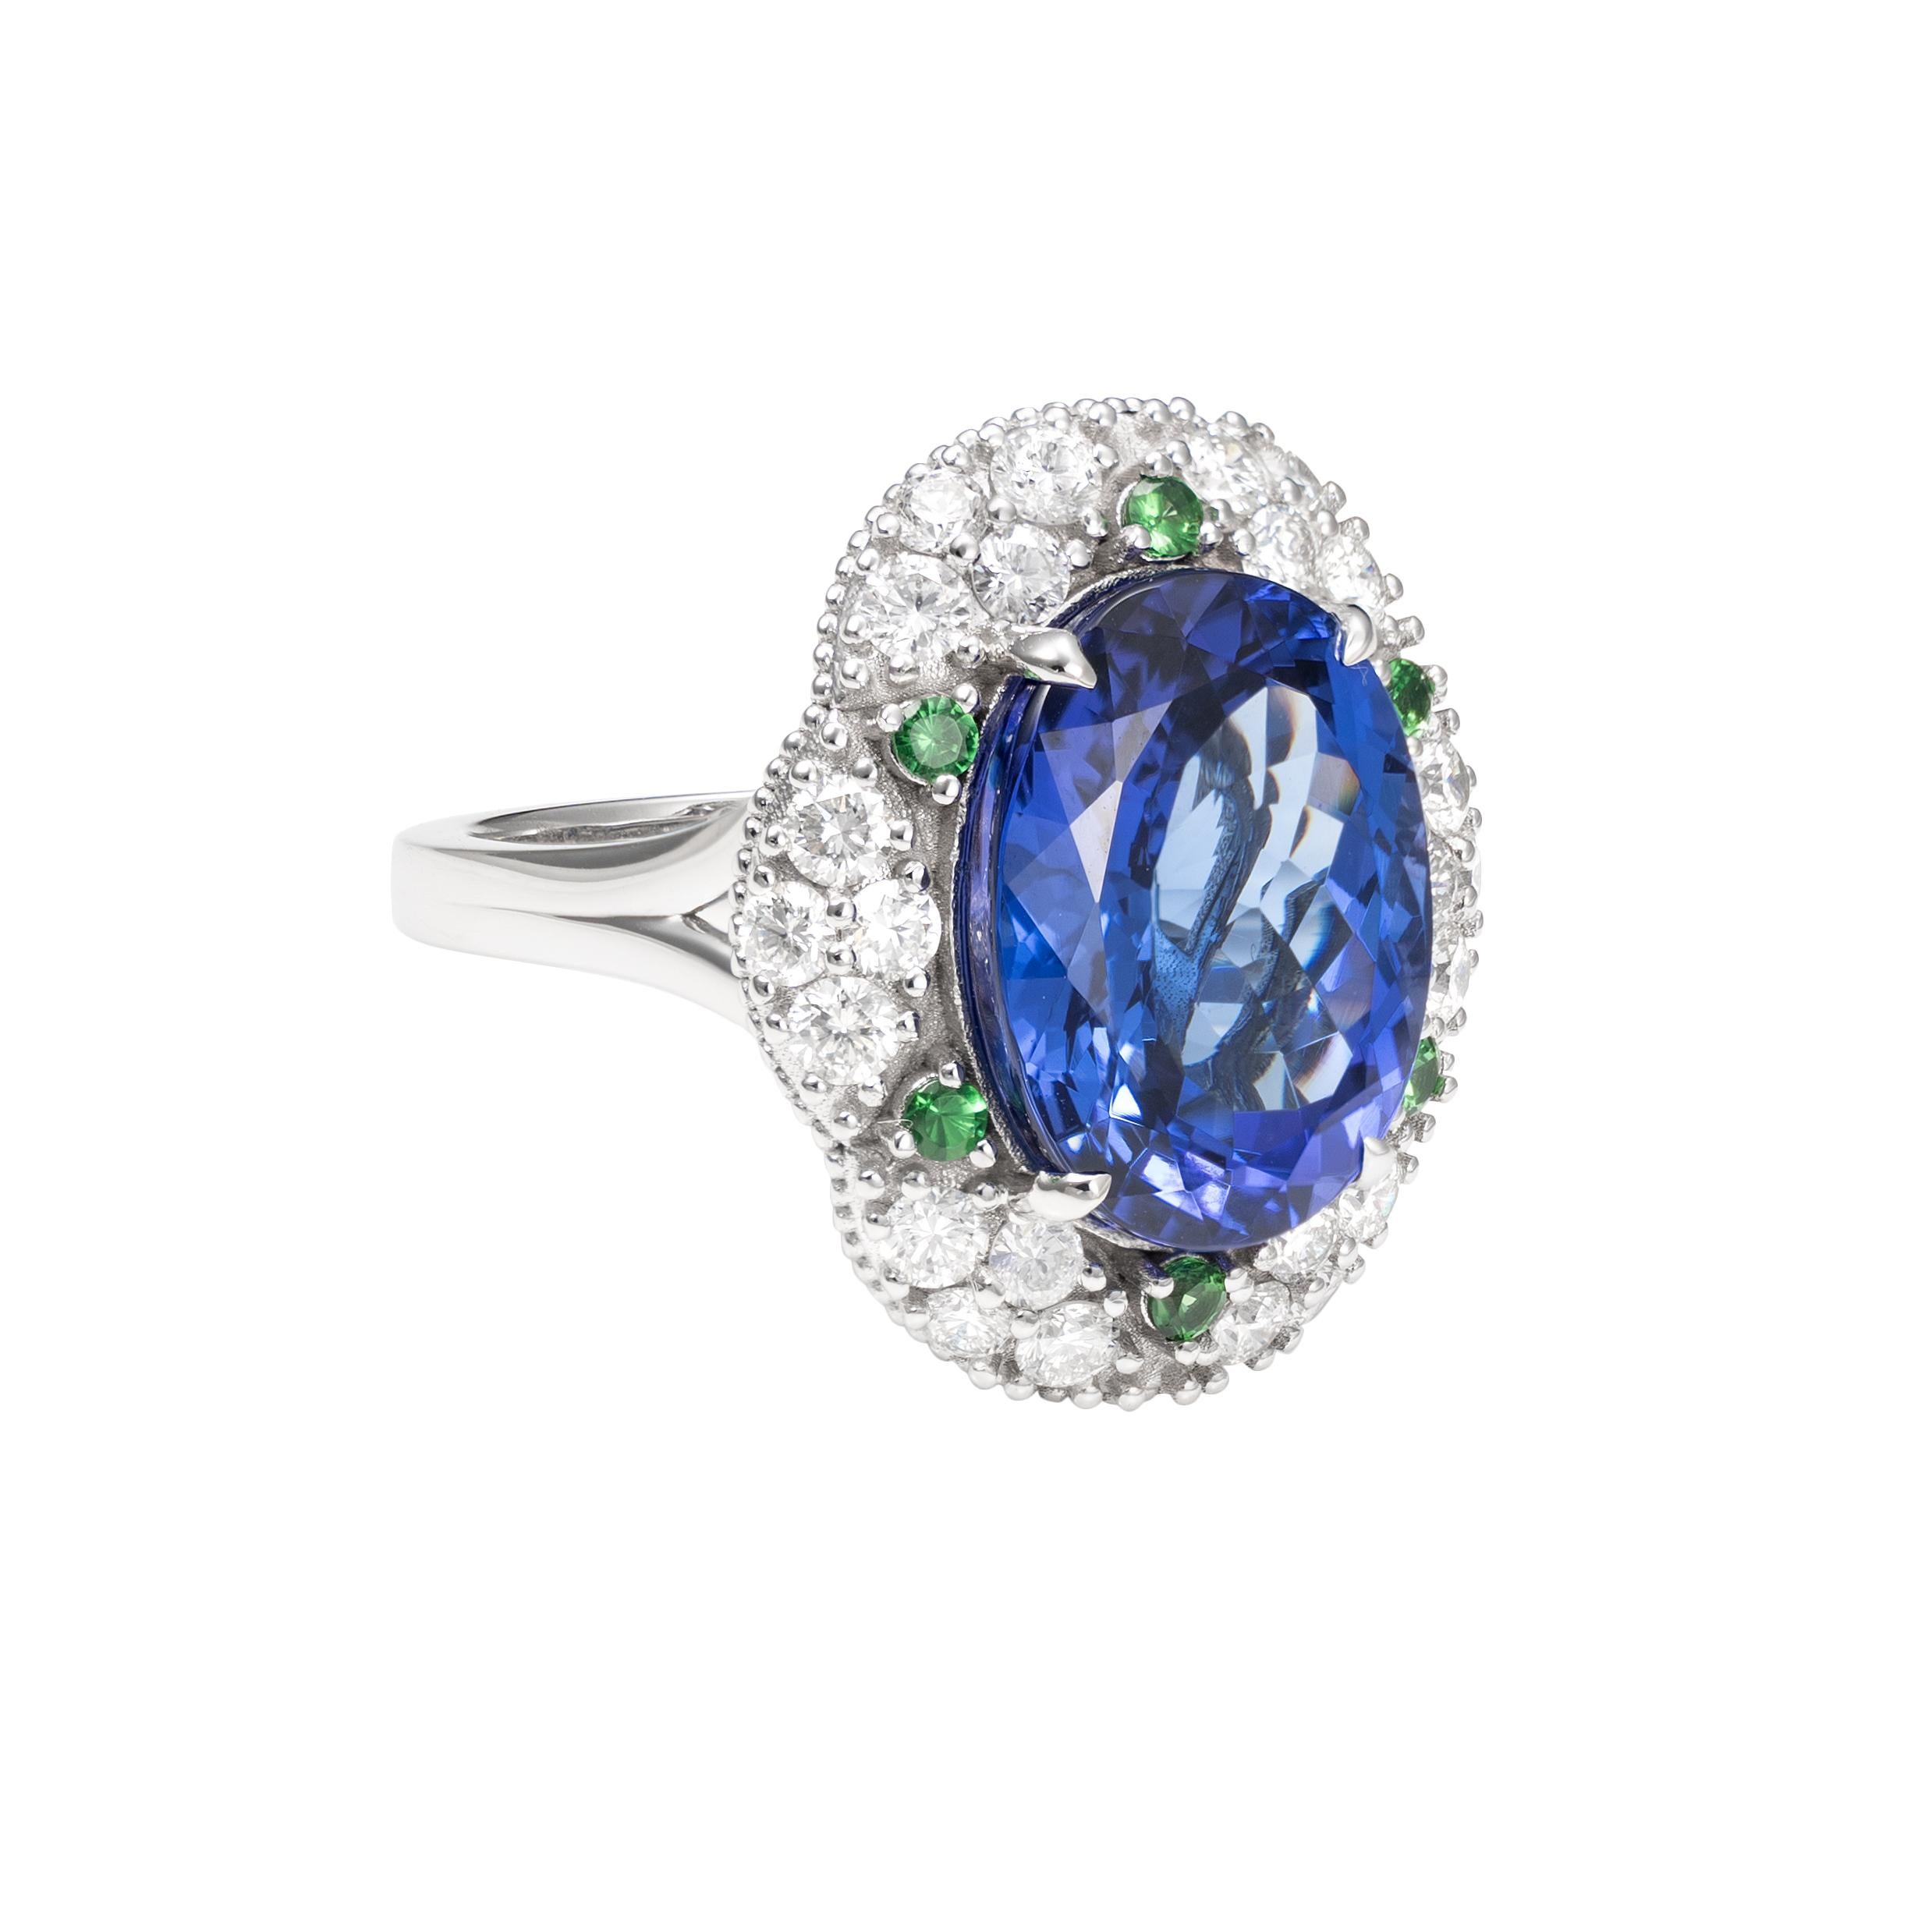 This collection is named as “Blue Planet” to represent Earth’s marine realm. The tantalizing Tanzanite represents the vast oceans of our planet. They are accented with subtle Tsavorites to display a beautiful harmony between land and sea. This ring